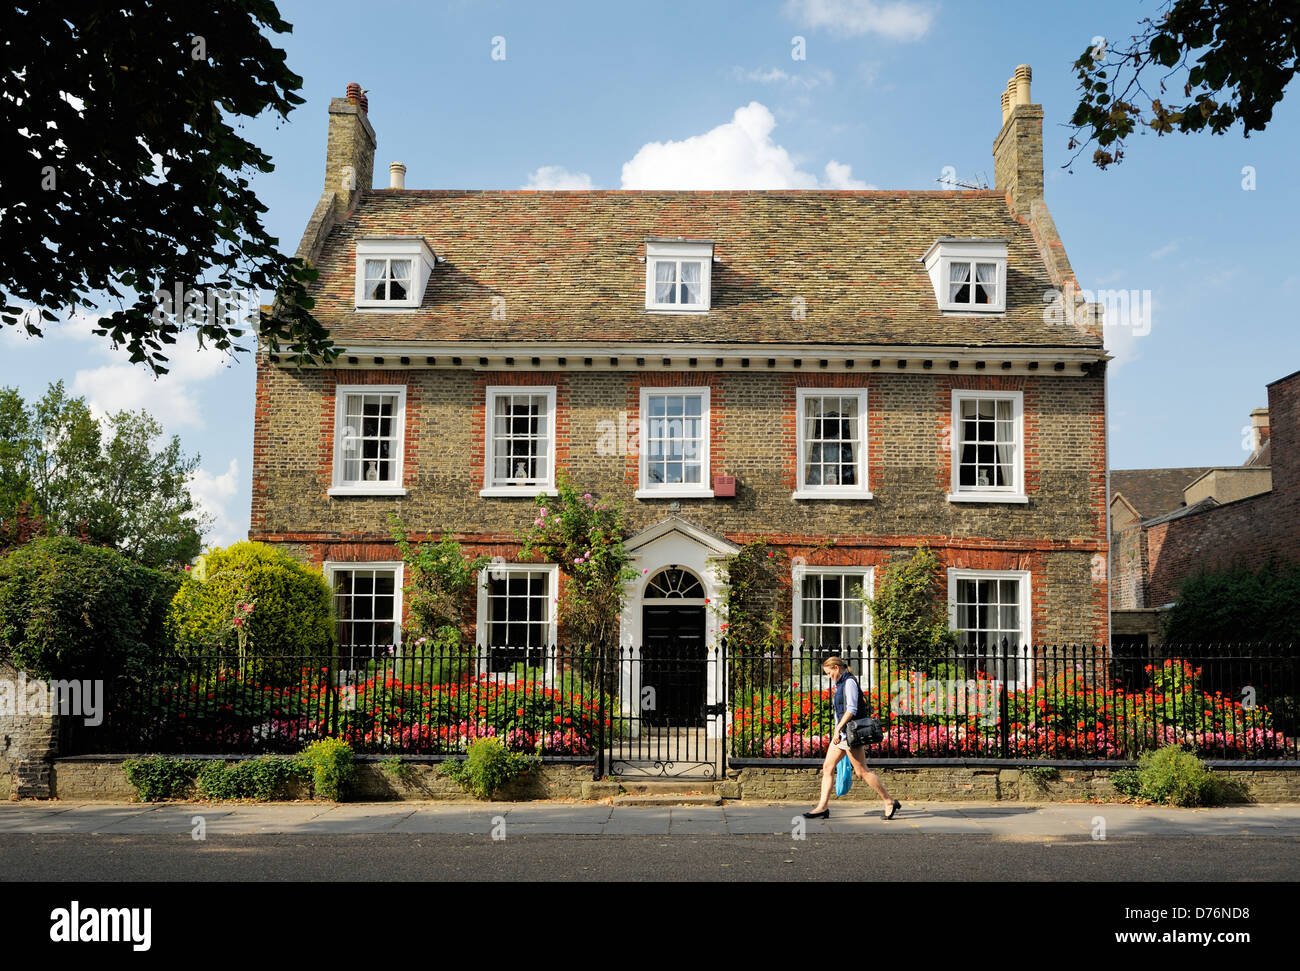 A fine English brick town house on Palace Green close to West Door of Ely Cathedral. Cambridgeshire, England Stock Photo